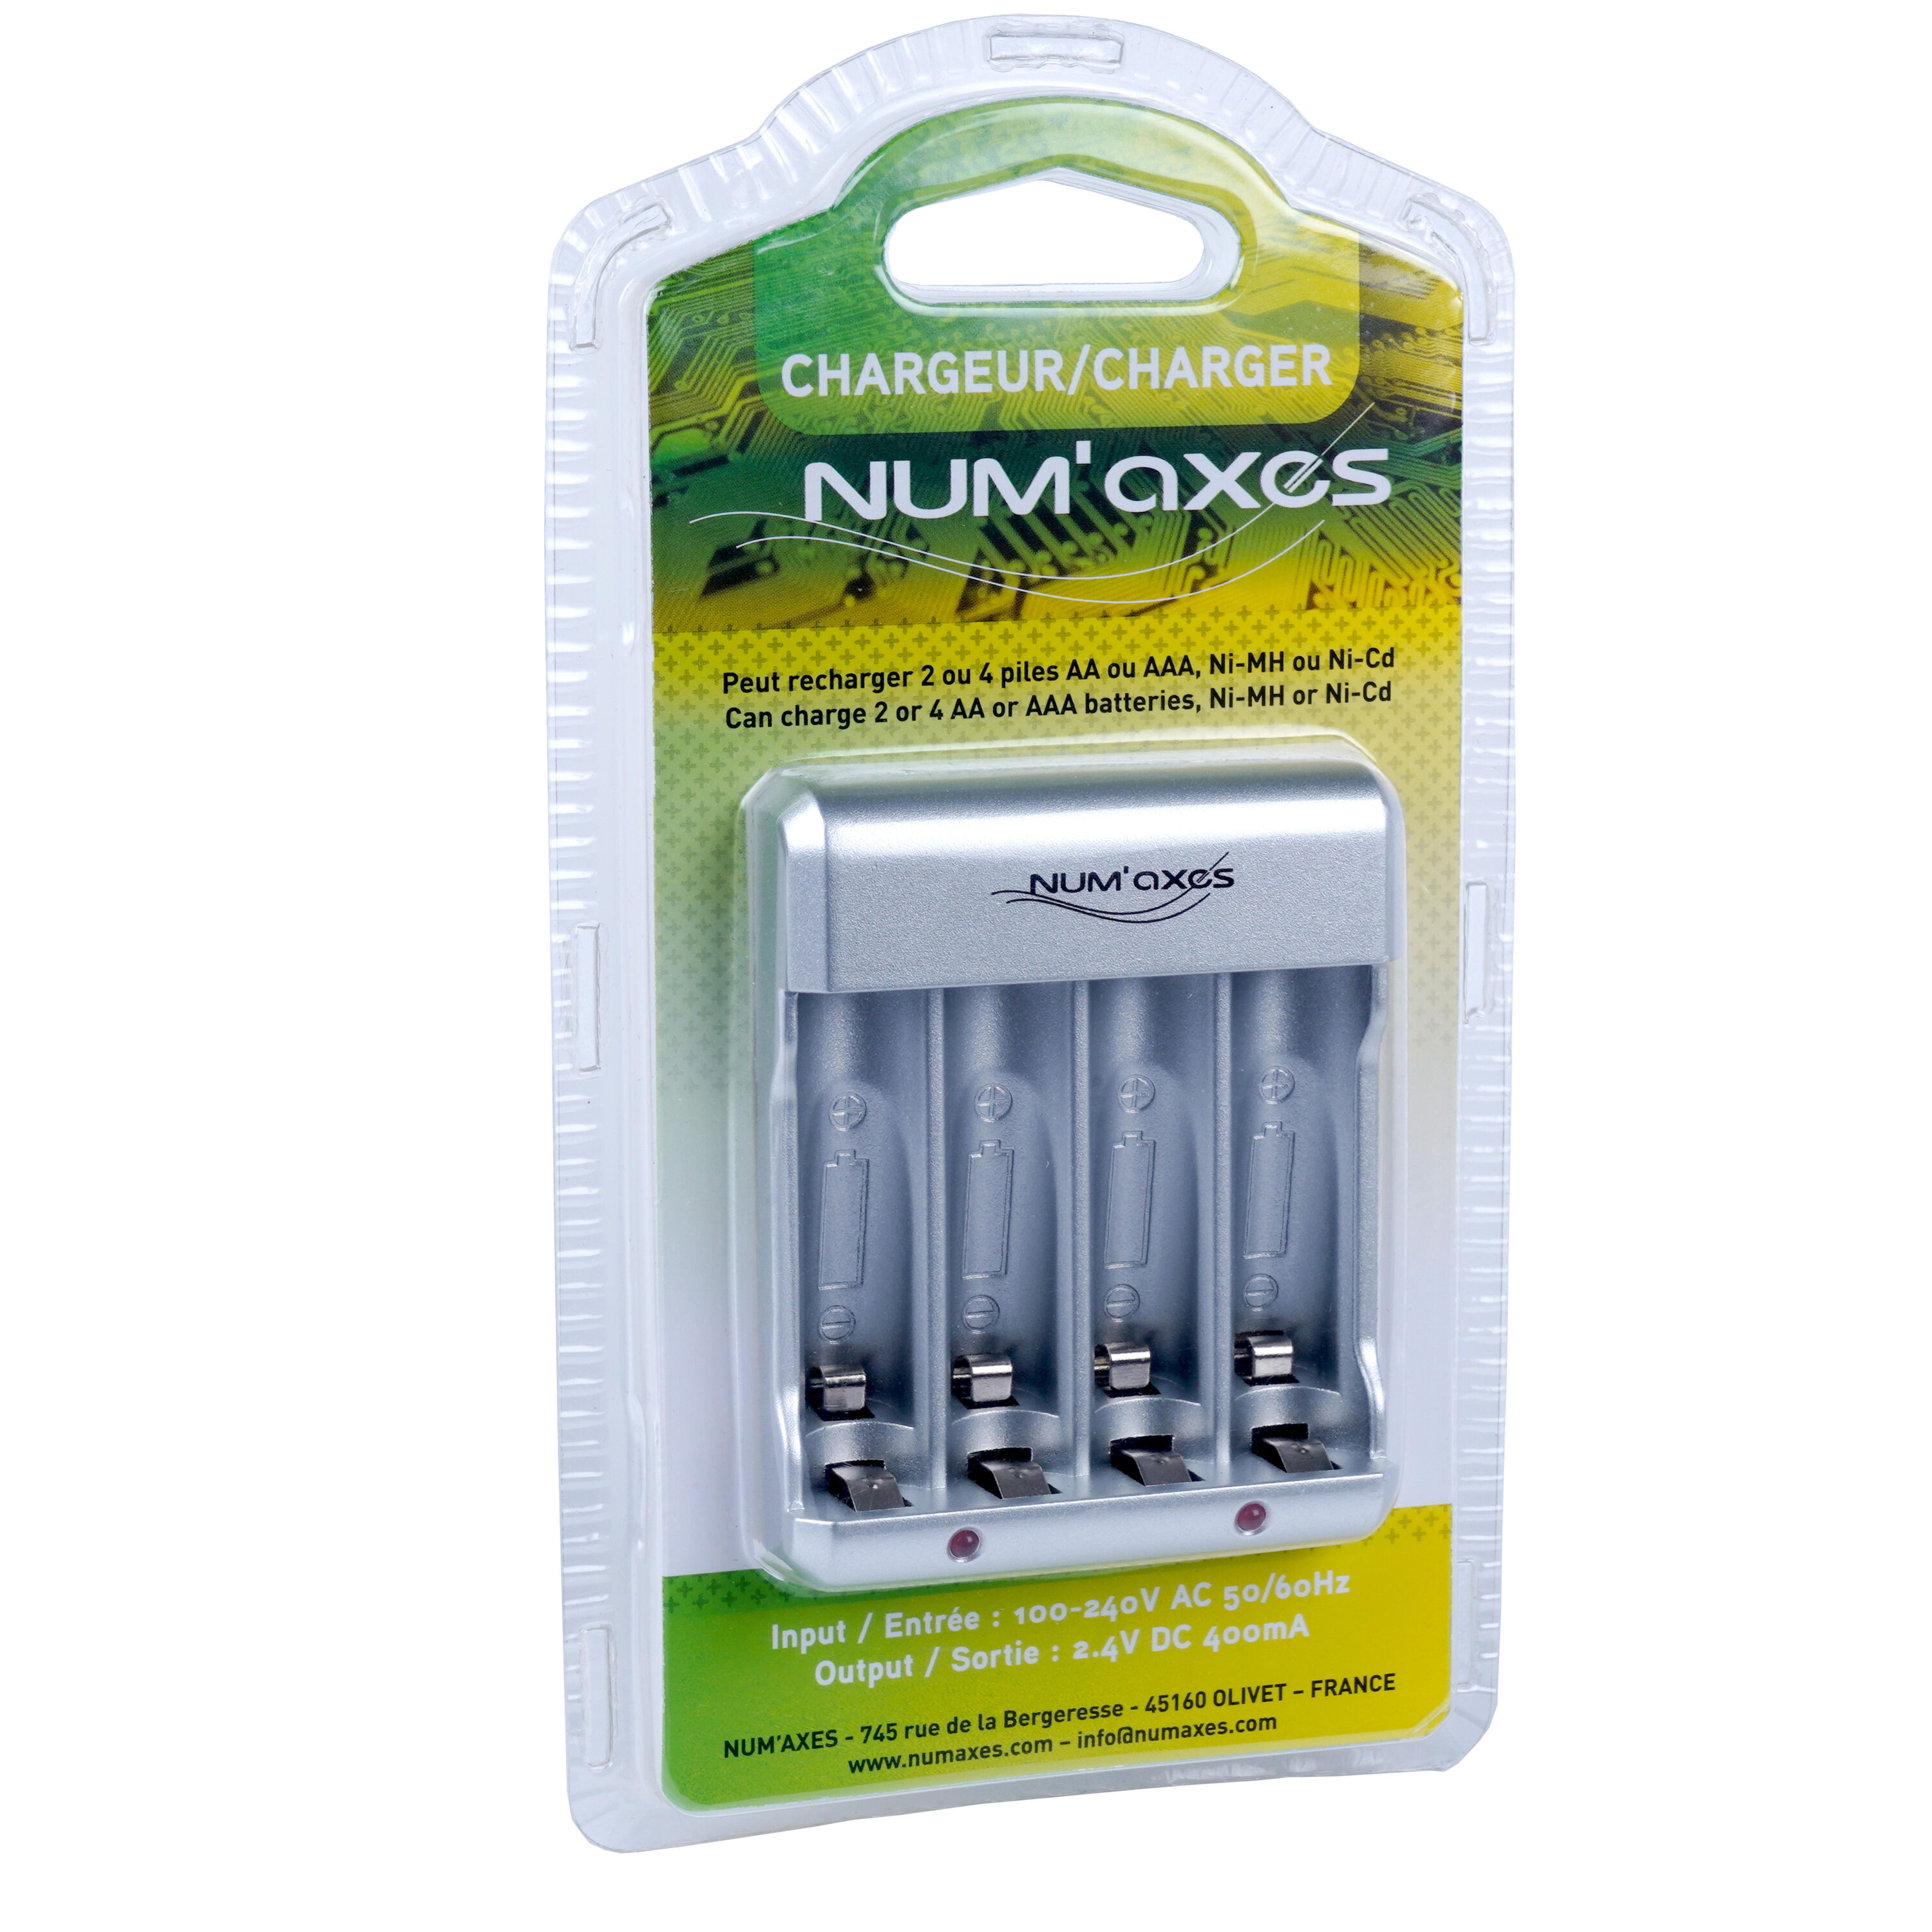 NUM'AXES Battery Charger